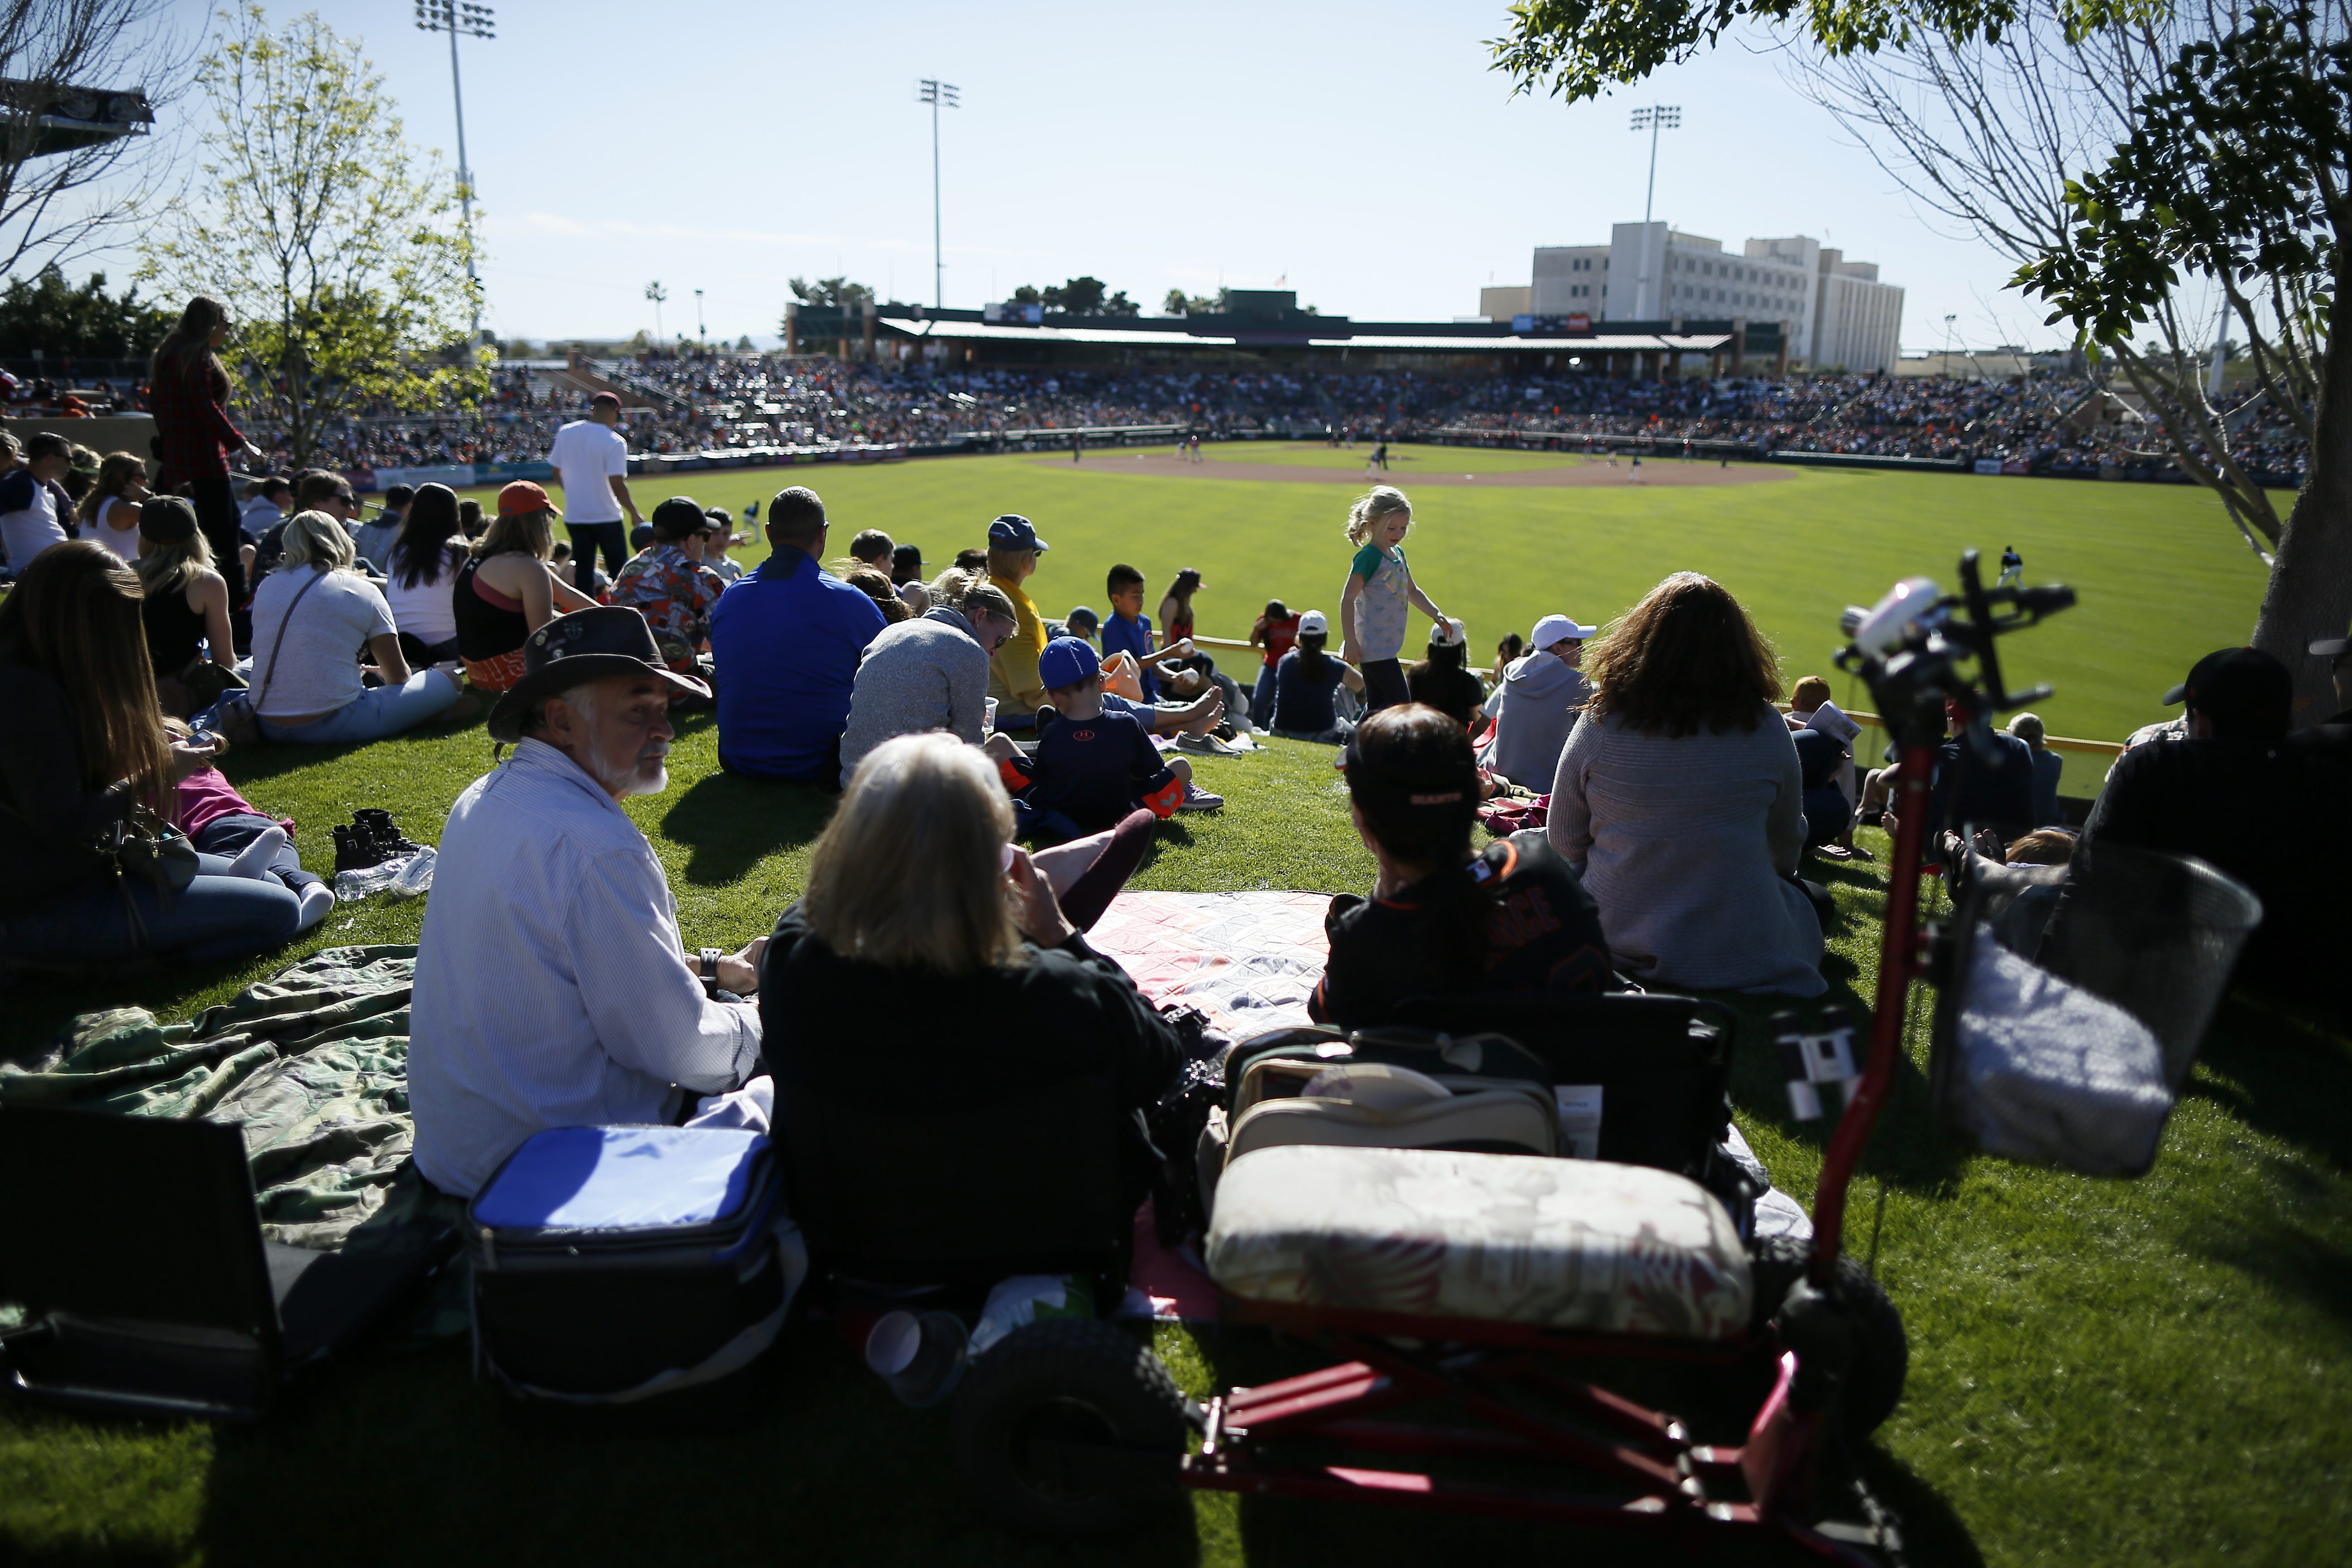 Spring training kicks off with pitch-perfect spring weather